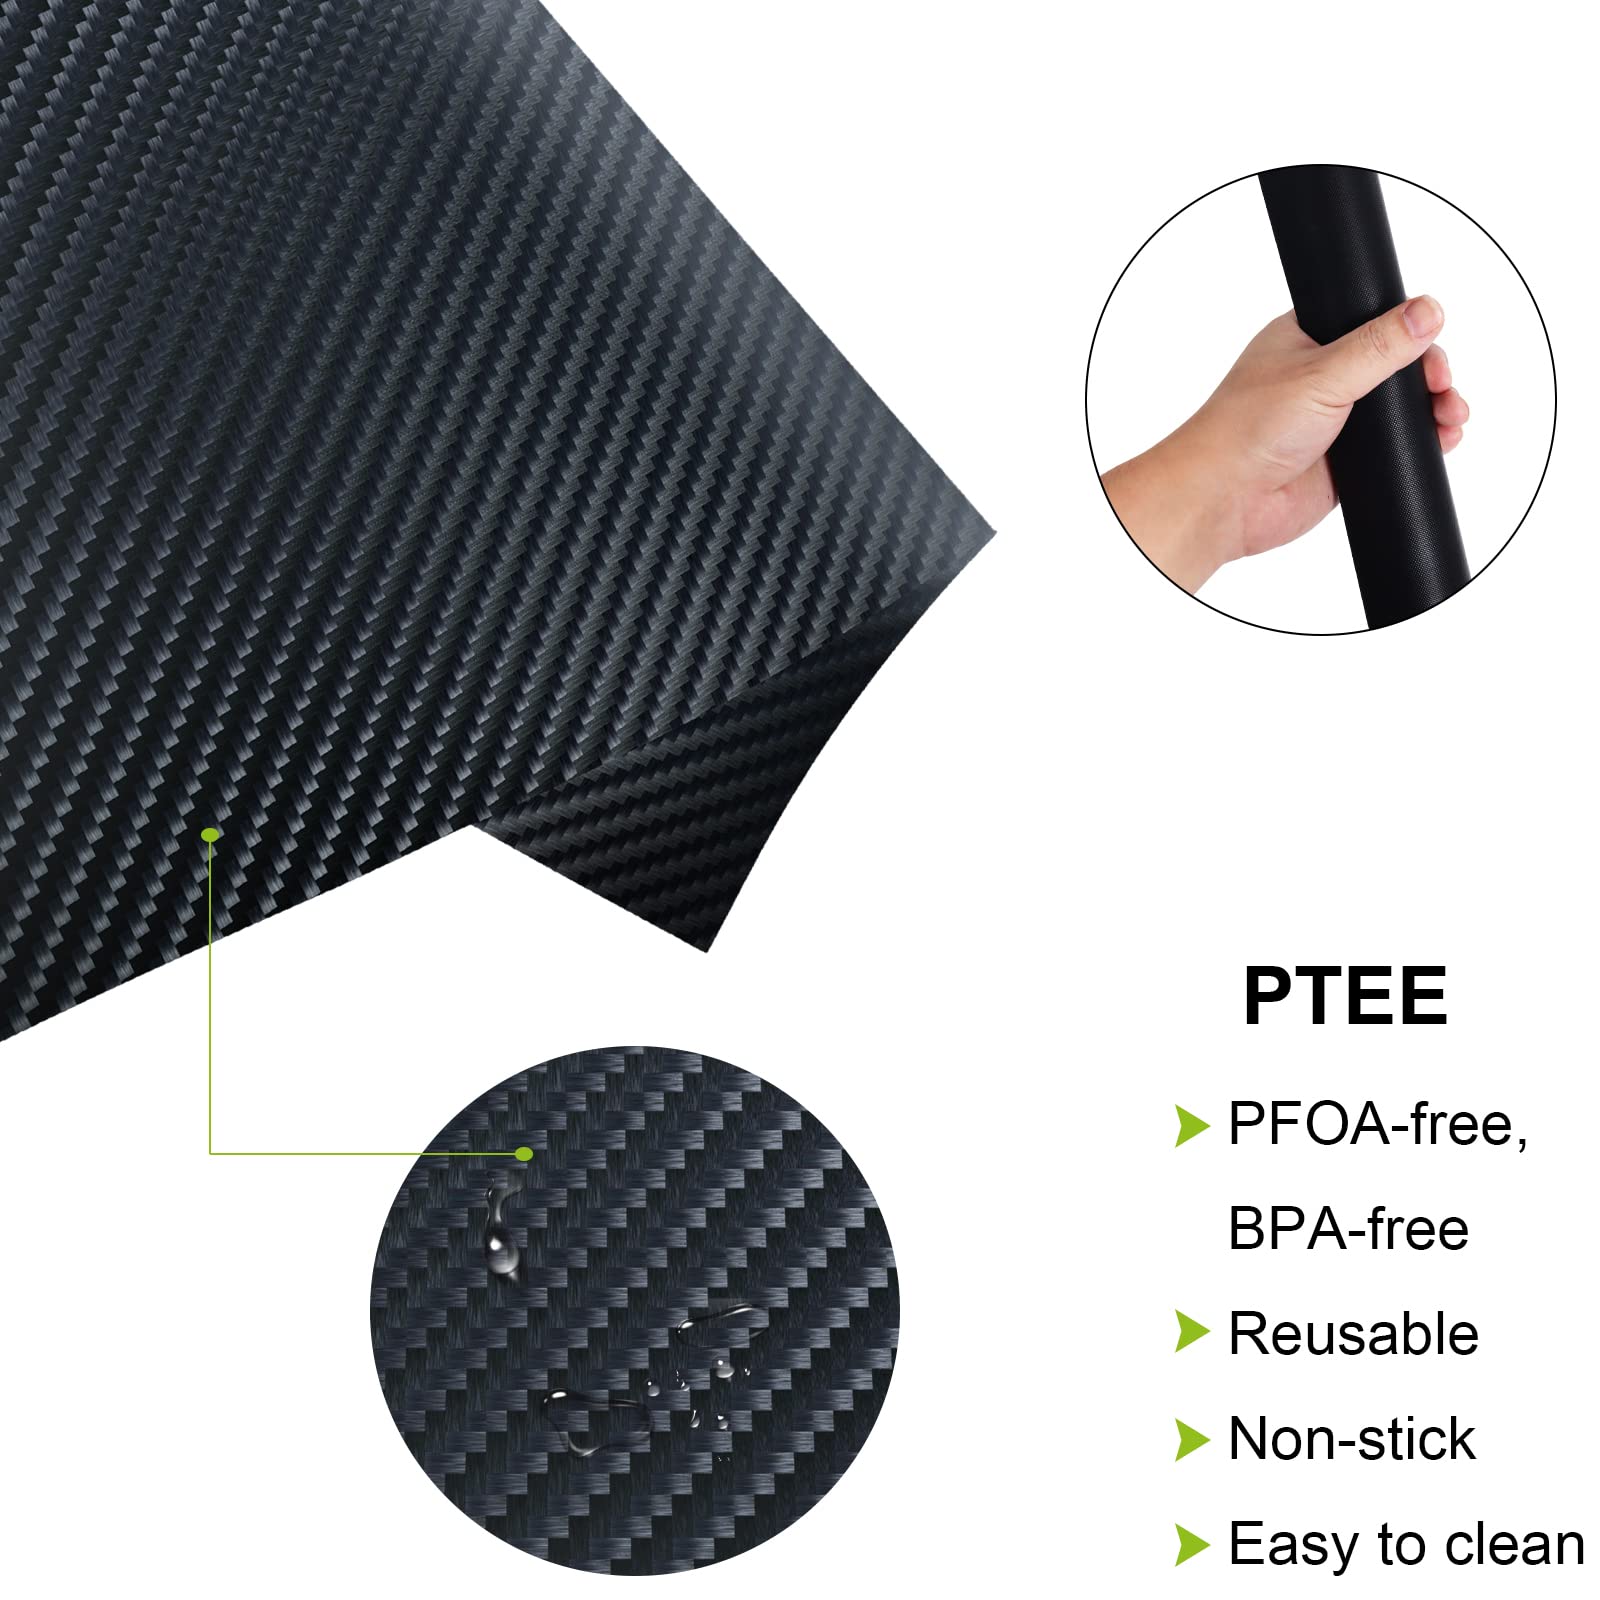 Air Fryer Oven Liners, 4pcs Heat Resistant Non-stick Oven Baking Mat & Air Fryer Liners Compatible with Ninja Foodi SP101 Air Fryer Oven